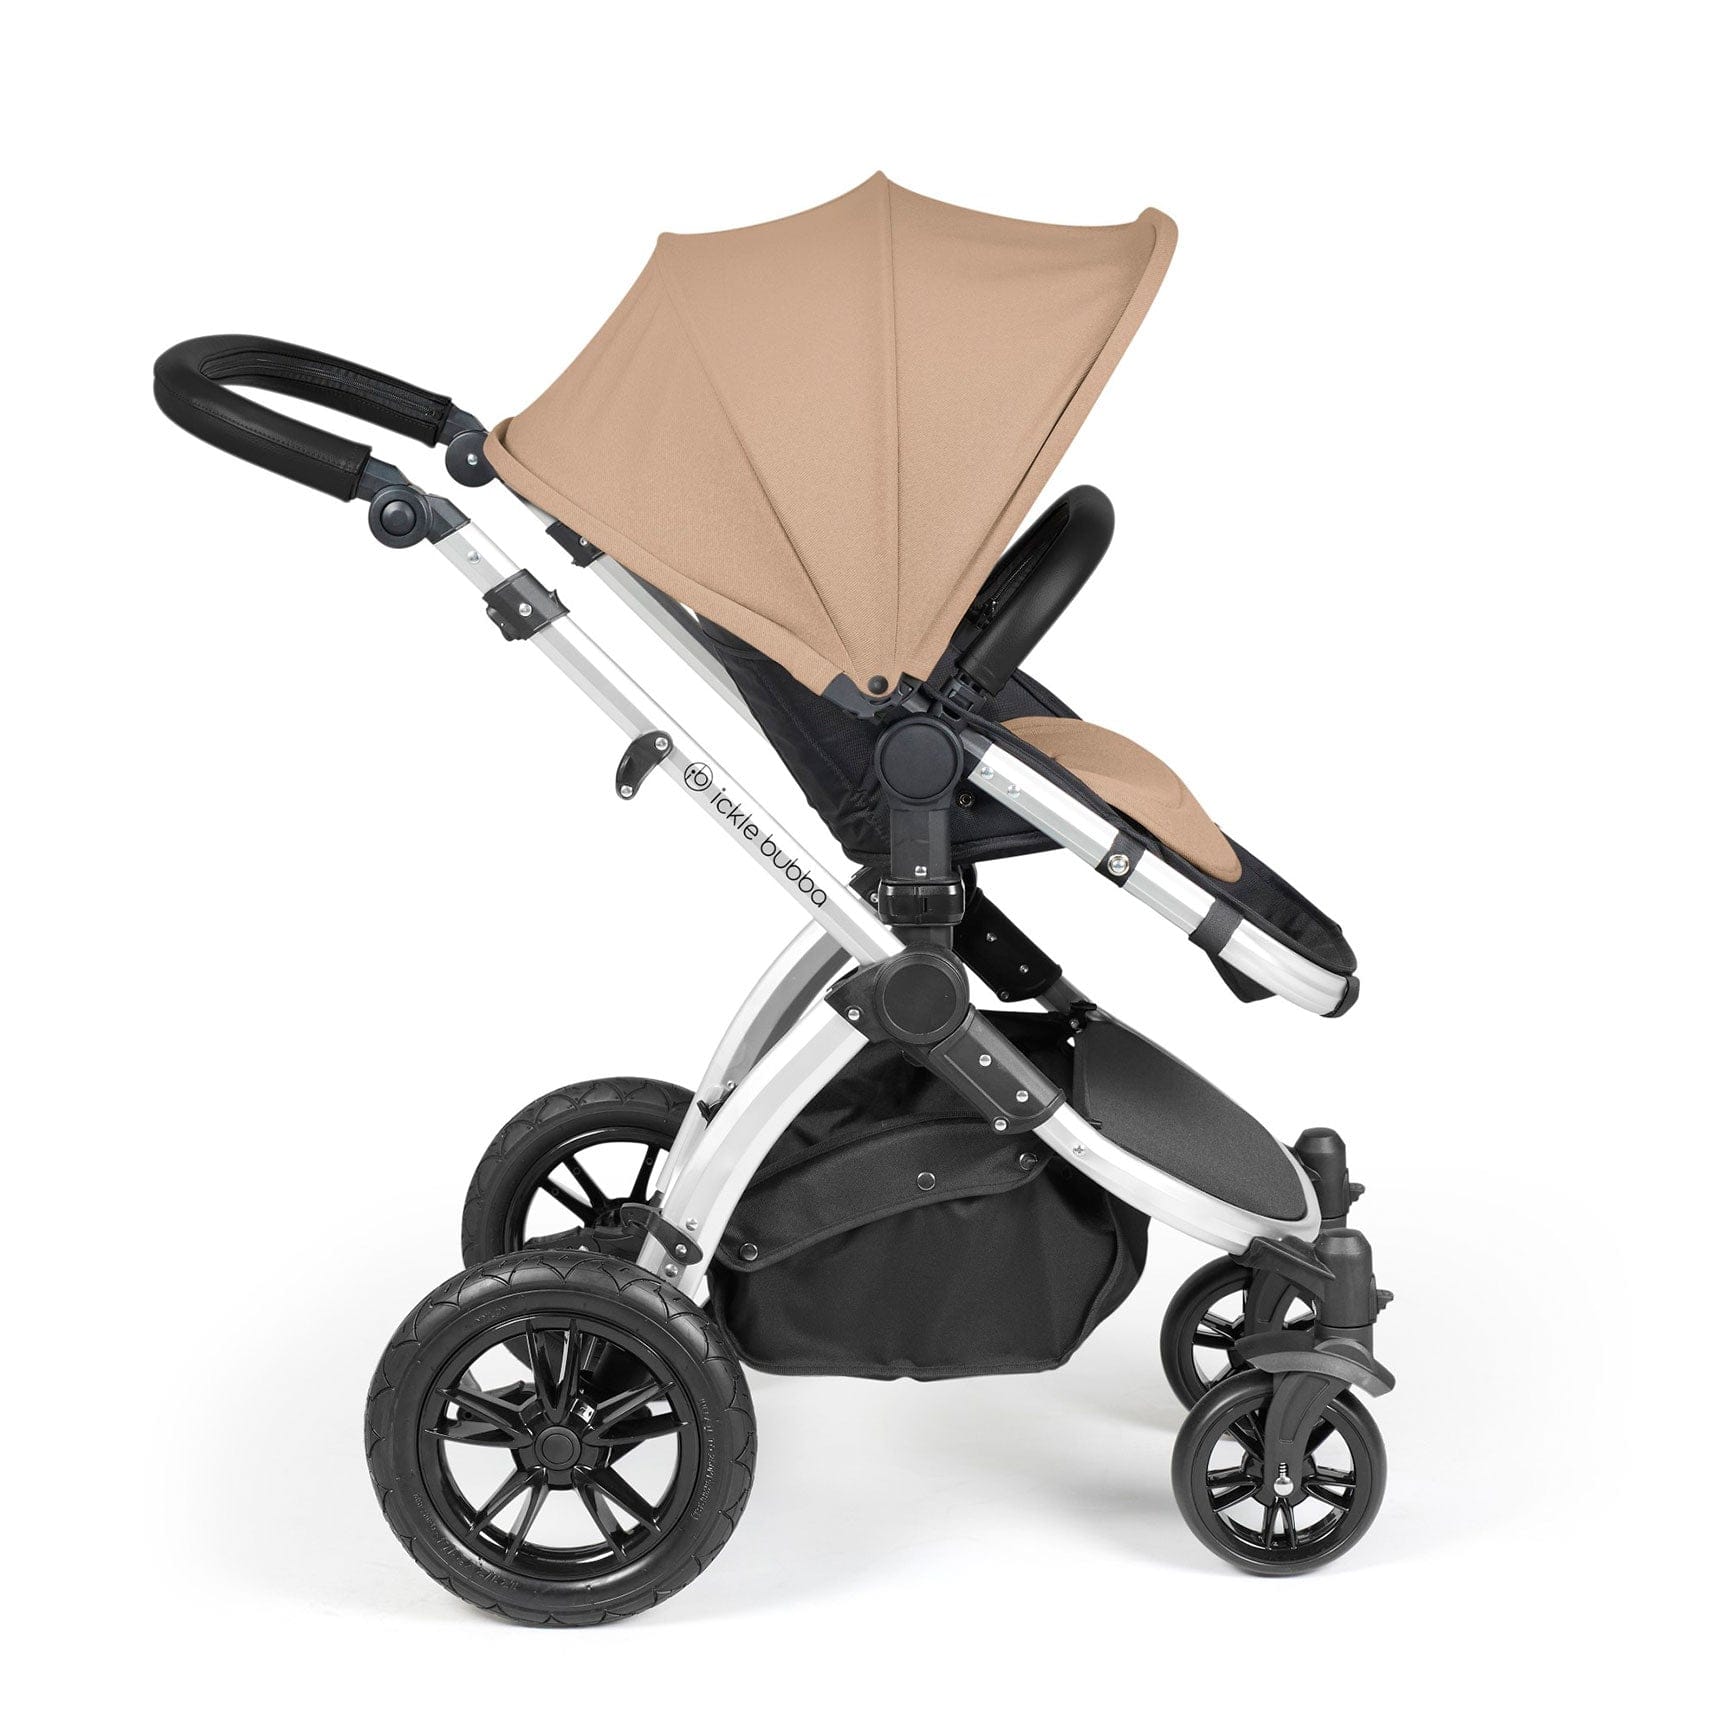 Ickle Bubba travel systems Ickle Bubba Stomp Luxe 2 in 1 Plus Pushchair & Carrycot - Silver/Desert/Black 10-003-001-257